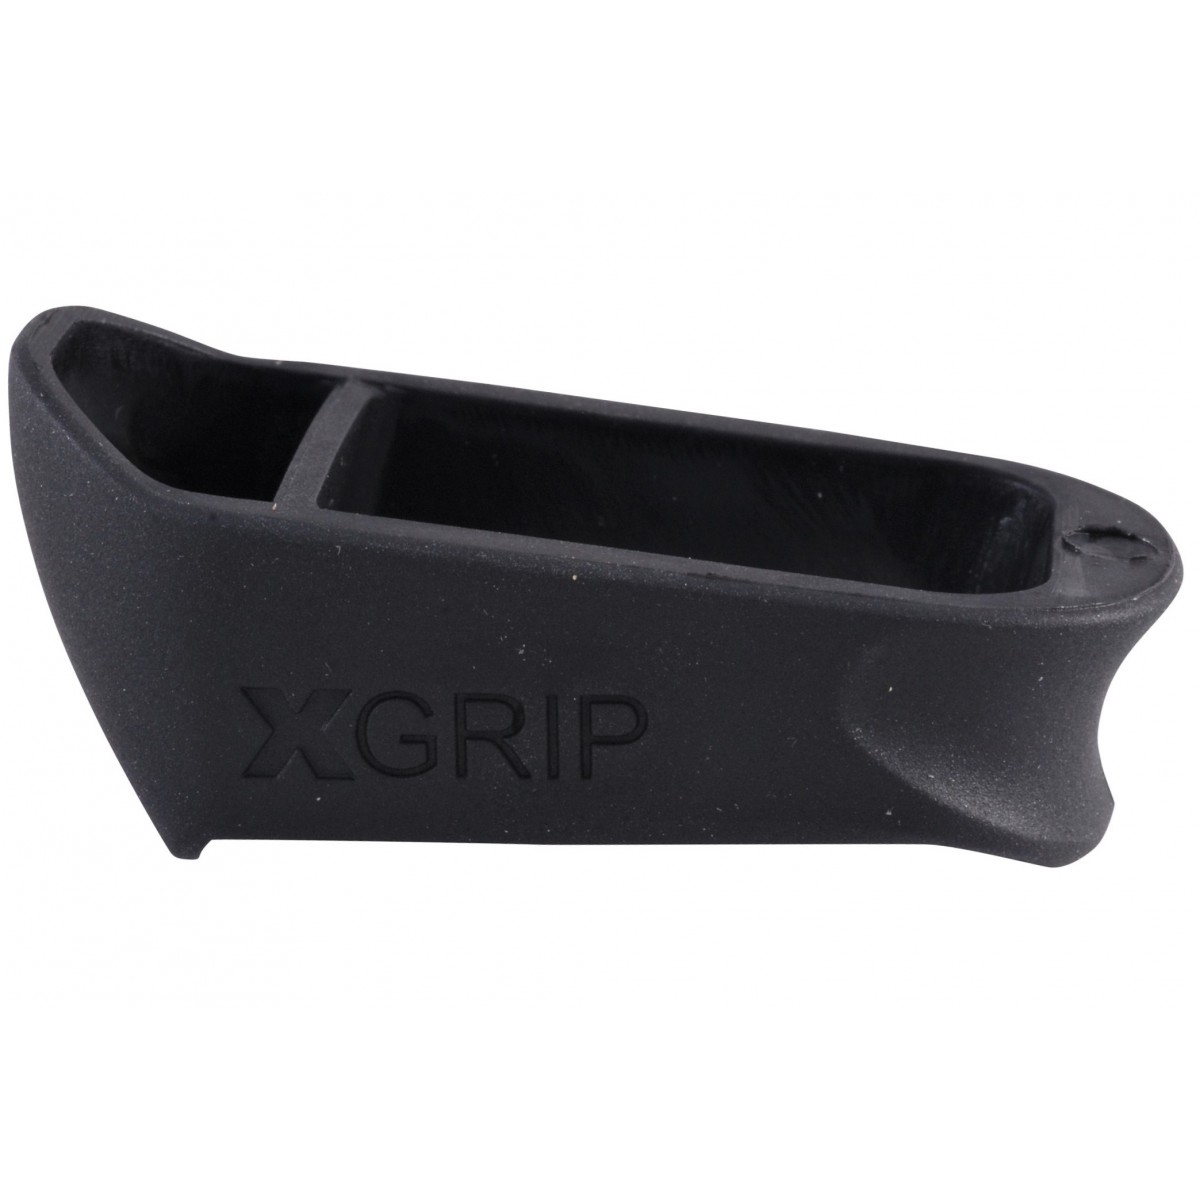 9mm Grip Adapter for Glock 17/22/31 Magazine in 19/23/32 Black 